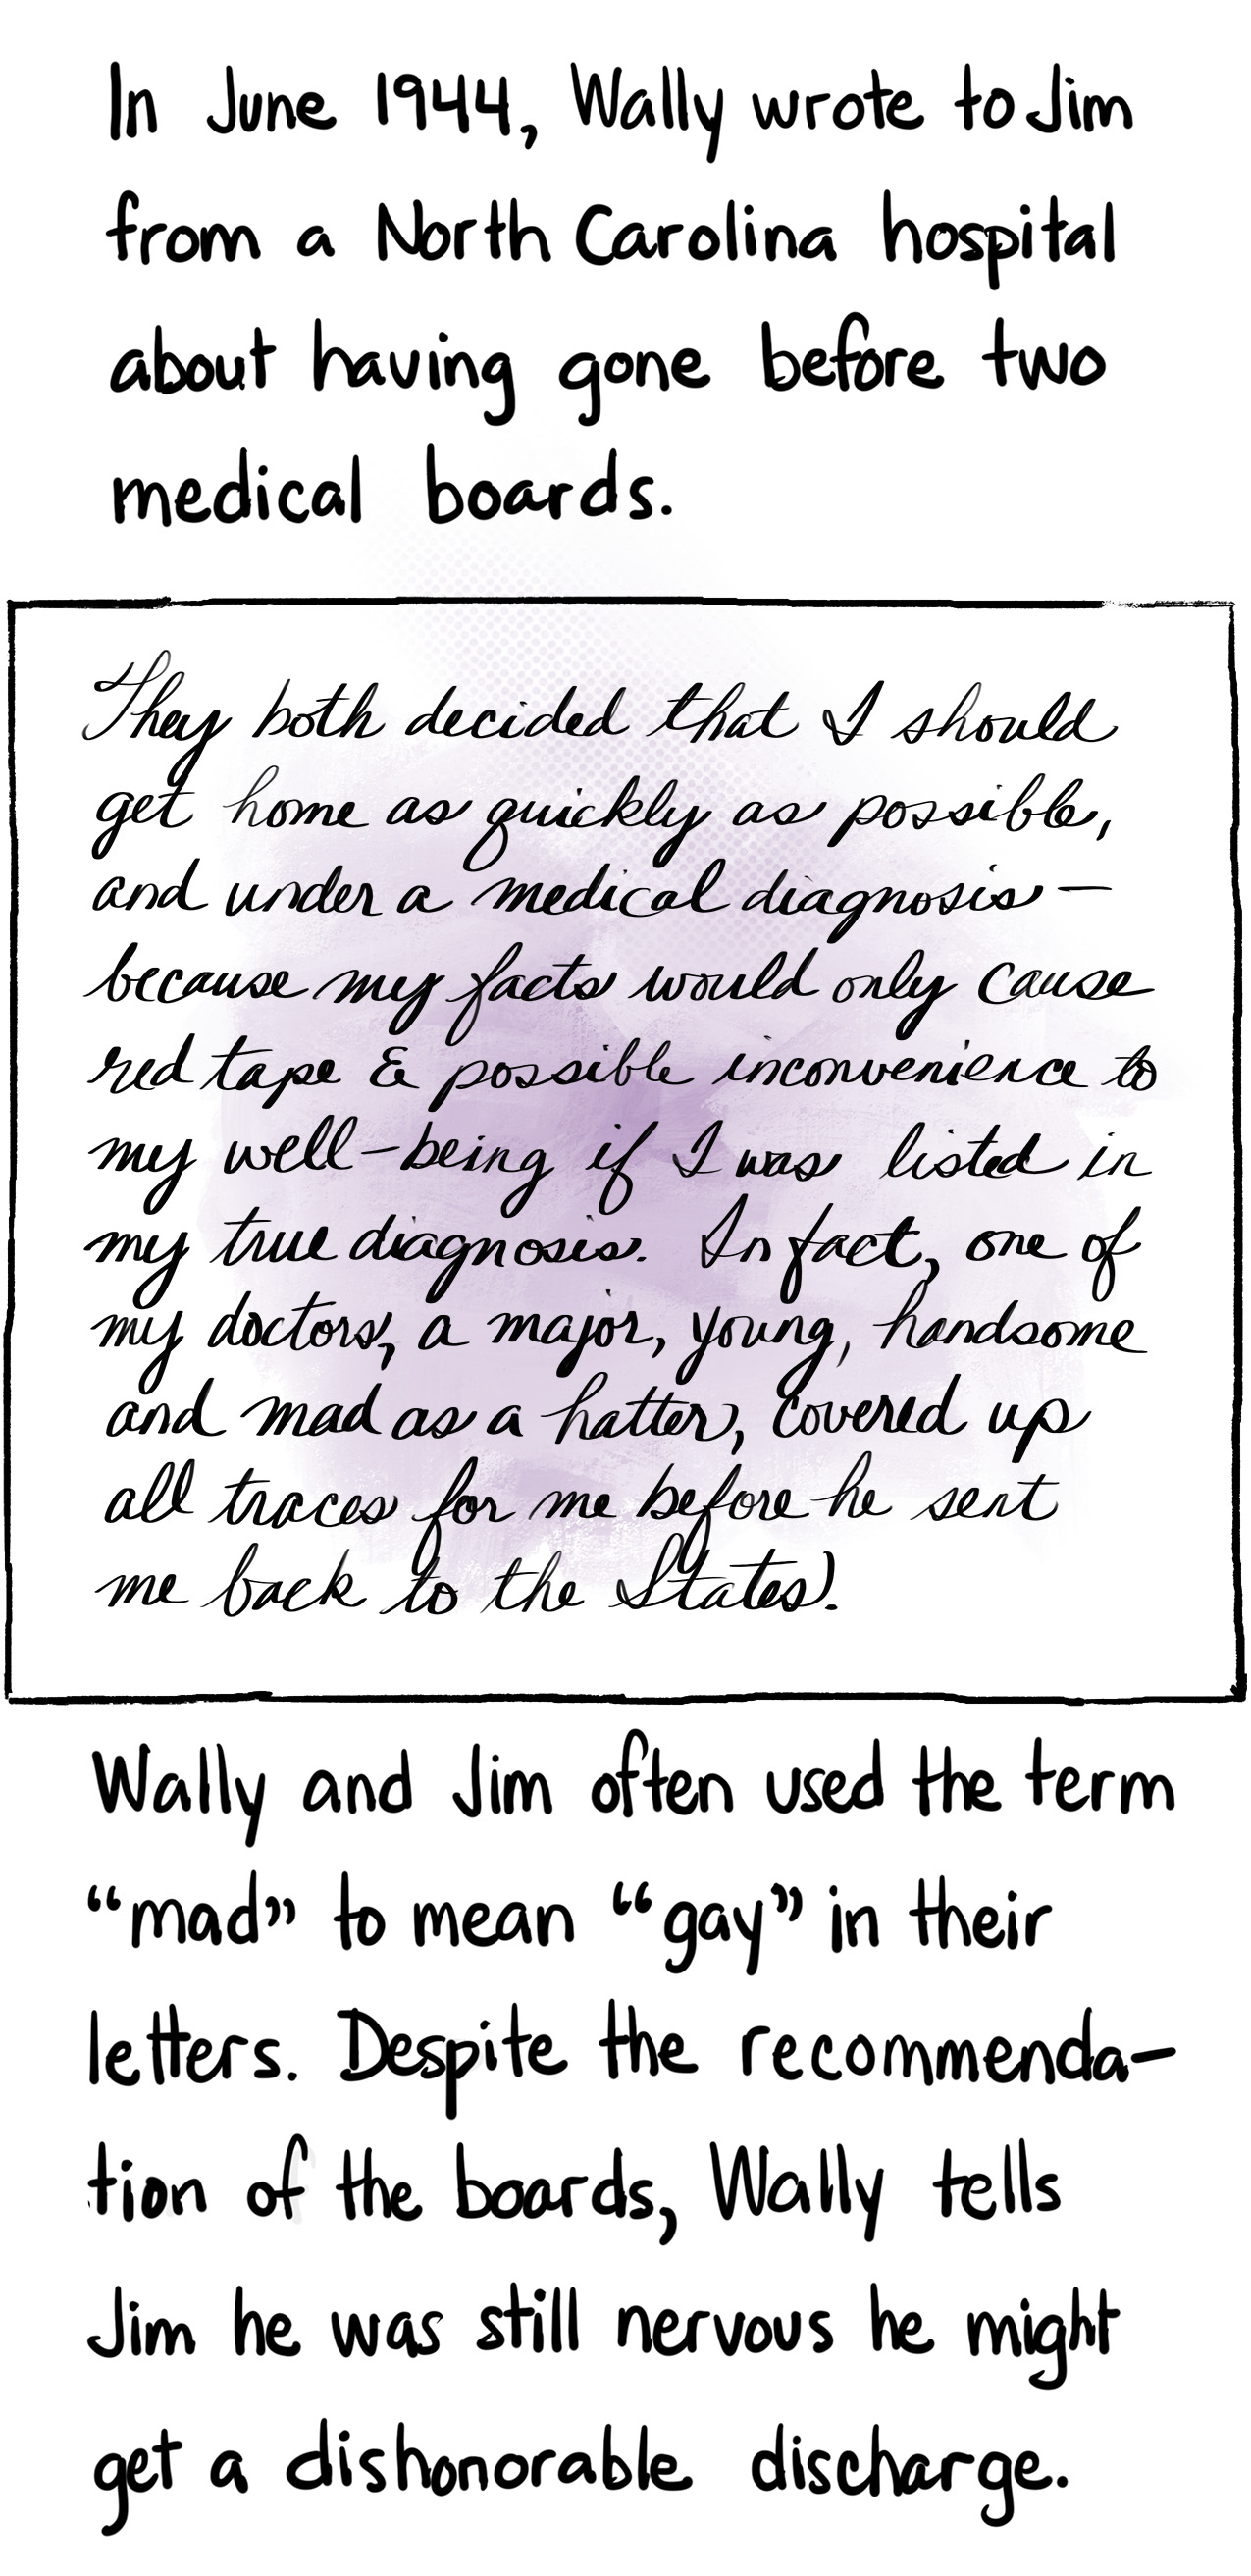 Text: In June 1944, Wally wrote to Jim from a North Carolina hospital about having gone before two medical boards. Image of letter: “They both decided that I should get home as quickly as possible, and under a medical diagnosis—because my facts would only cause red tape & possible inconvenience to my well-being if I was listed in the true diagnosis. In fact one of my doctors, a major, young, handsome, and mad as a hatter, covered up all traces for me before he sent me back here to the States.” Text: Wally and Jim often used the term “mad” to mean “gay” in their letters. Despite the recommendation of the boards, Wally tells Jim he was still nervous he might get a dishonorable discharge.